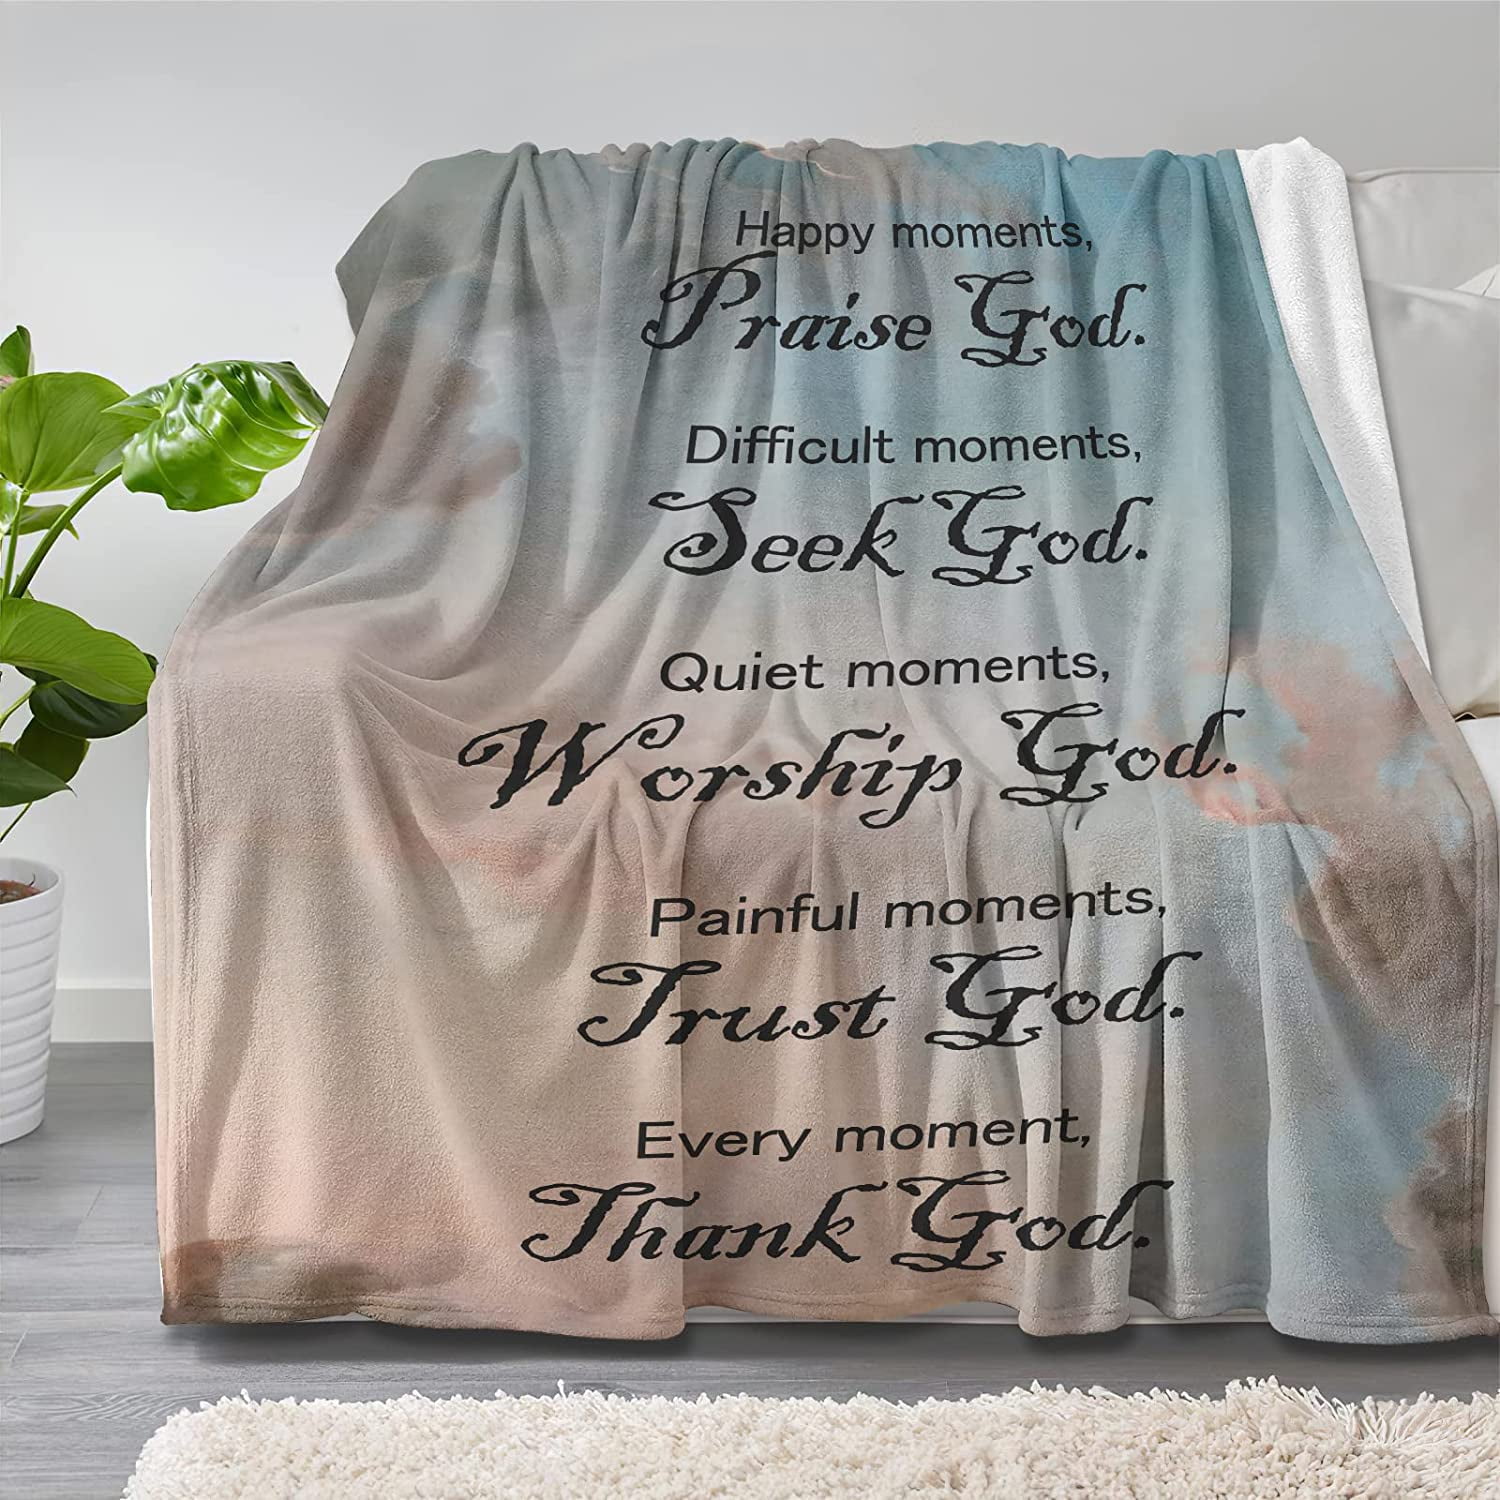  Bible Verse Blanket, Inspirational Sunflower Prayer Blankets  and Throws with Scriptures Soft Plush Religious God Says Throw Blanket  Christian Faith Gifts for Women Men 80x60 Inch : Home & Kitchen